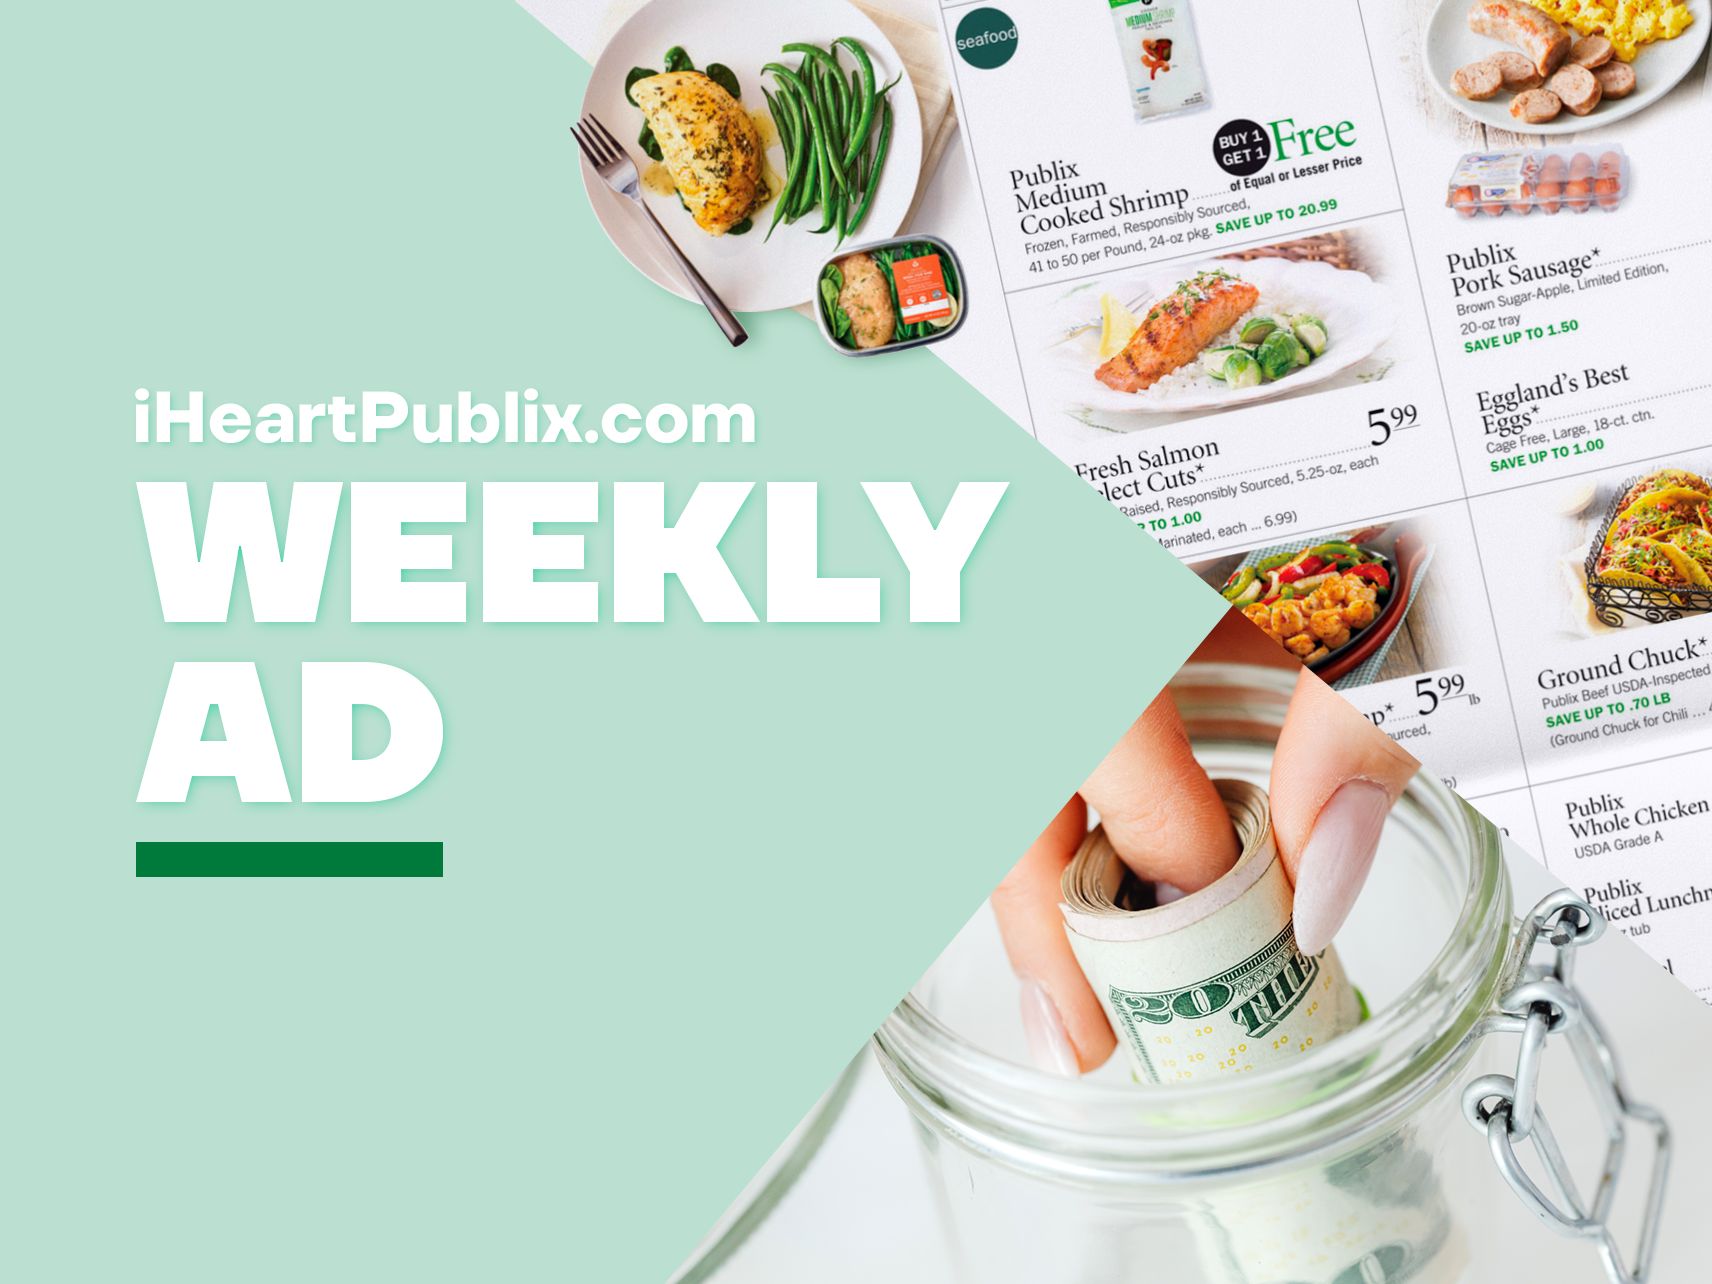 Publix Ad & Coupons Week Of 5/19 to 5/25 (5/18 to 5/24 For Some)